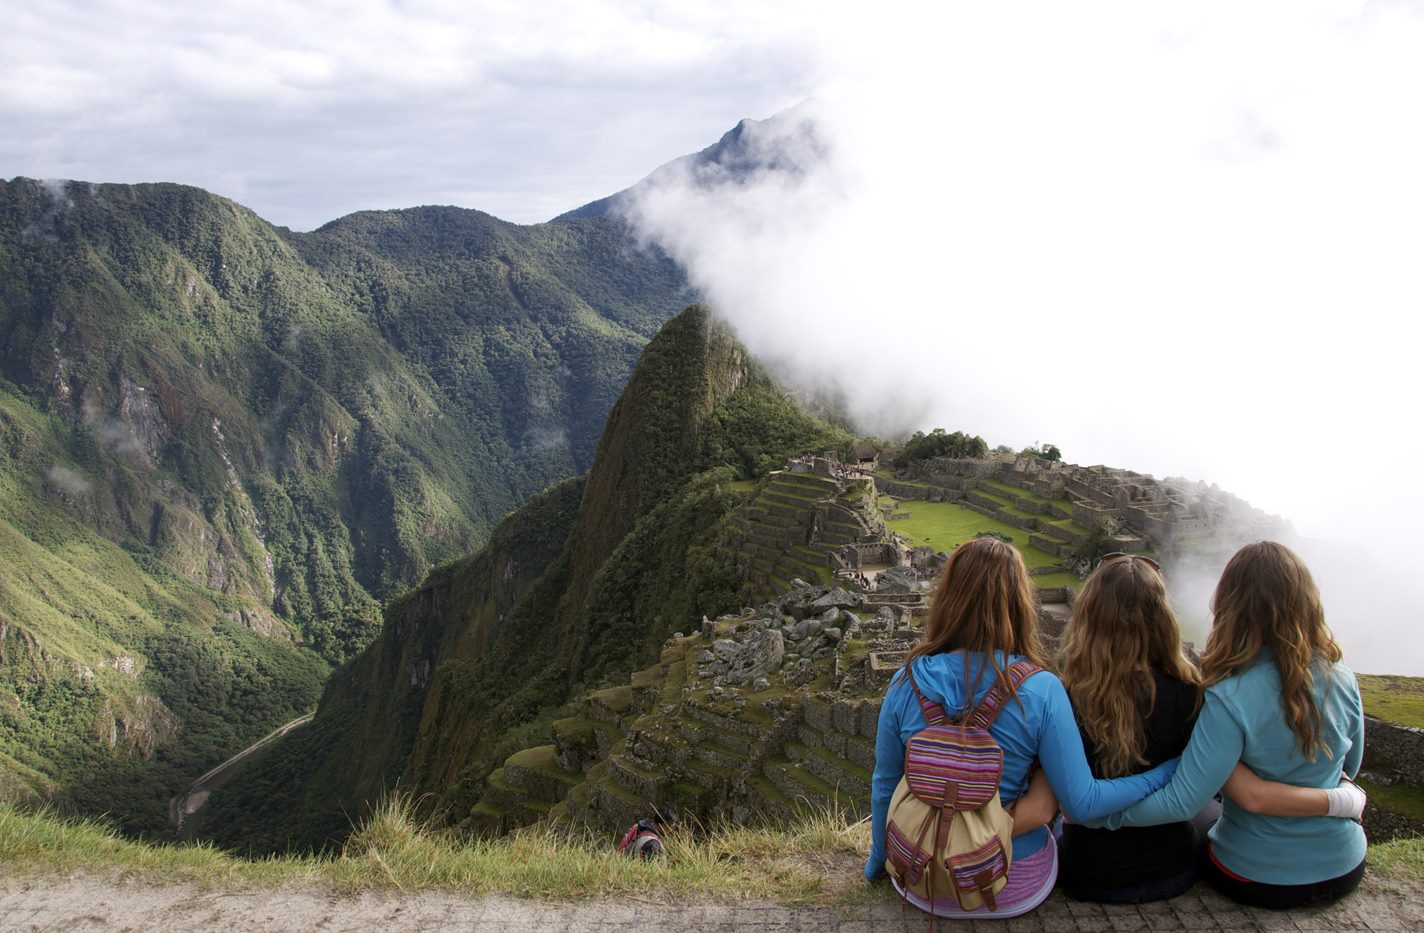 11 Questions to Ask your Friend Before Traveling Together